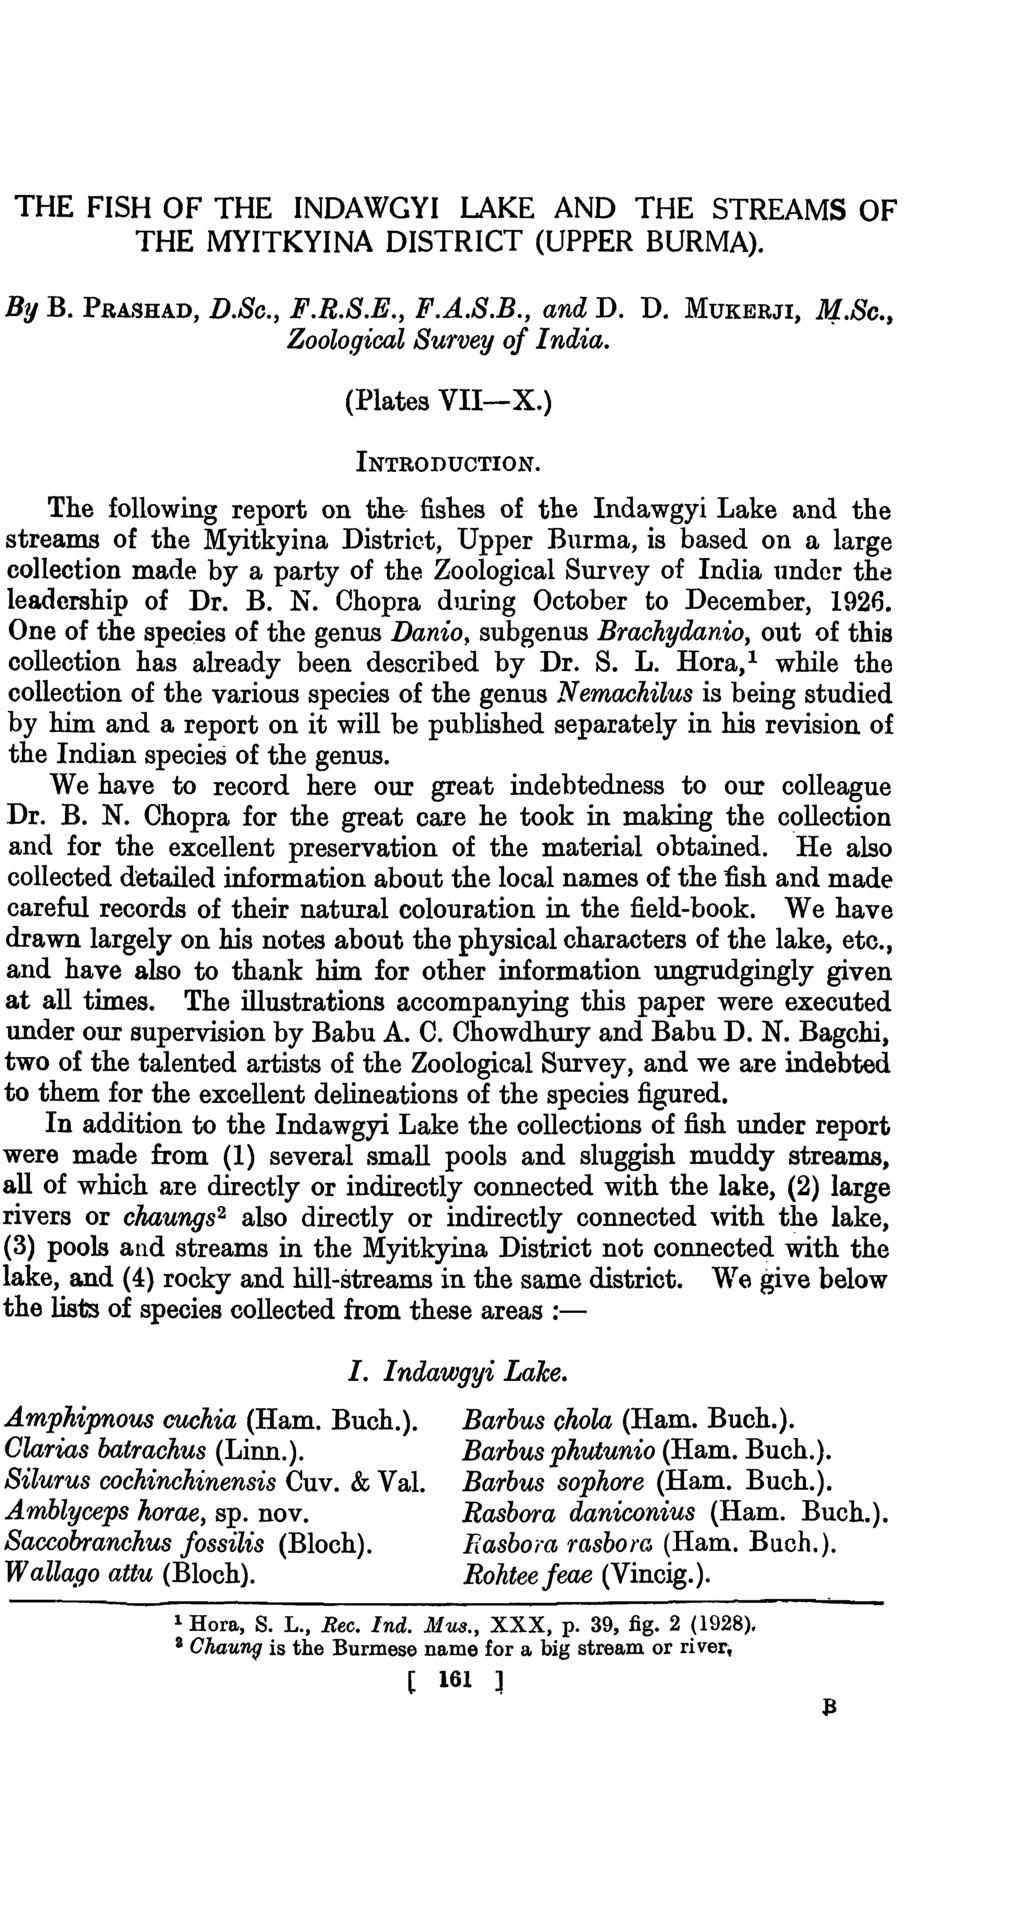 THE FISH OF THE INDAWGYI LAKE AND THE STREAMS OF THE MYITKYINA DISTRICT (UPPER BURMA). By B. PRASHAD, D.Se., F.R.S.E., F..A..S.B., and D. D. MUKERJI, M.Sc., Zoolo,qical Survey of India. (Plates VII-X.